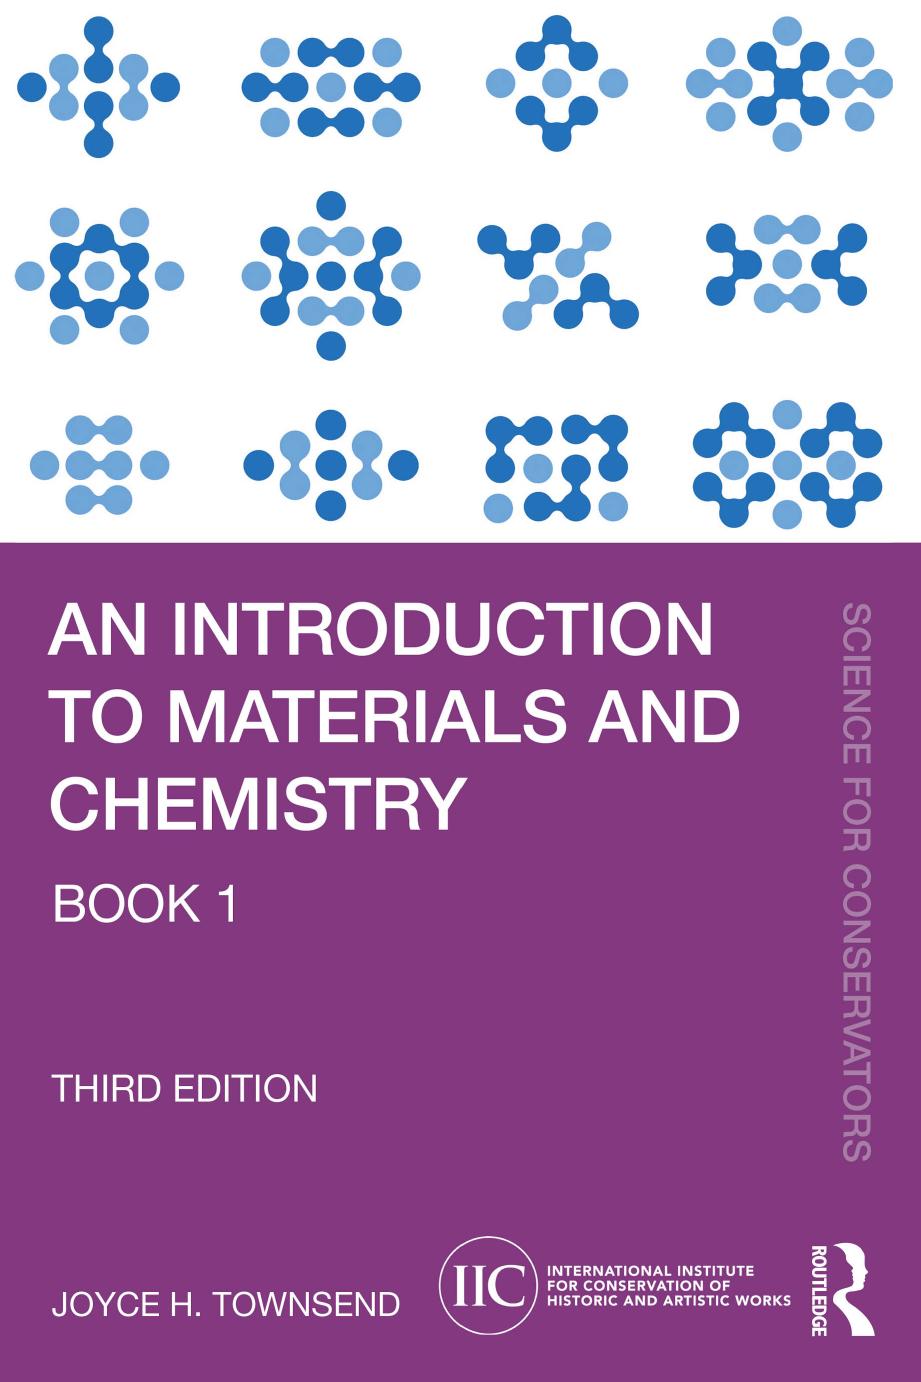 An Introduction to Materials and Chemistry: Book 1 by Townsend J.H